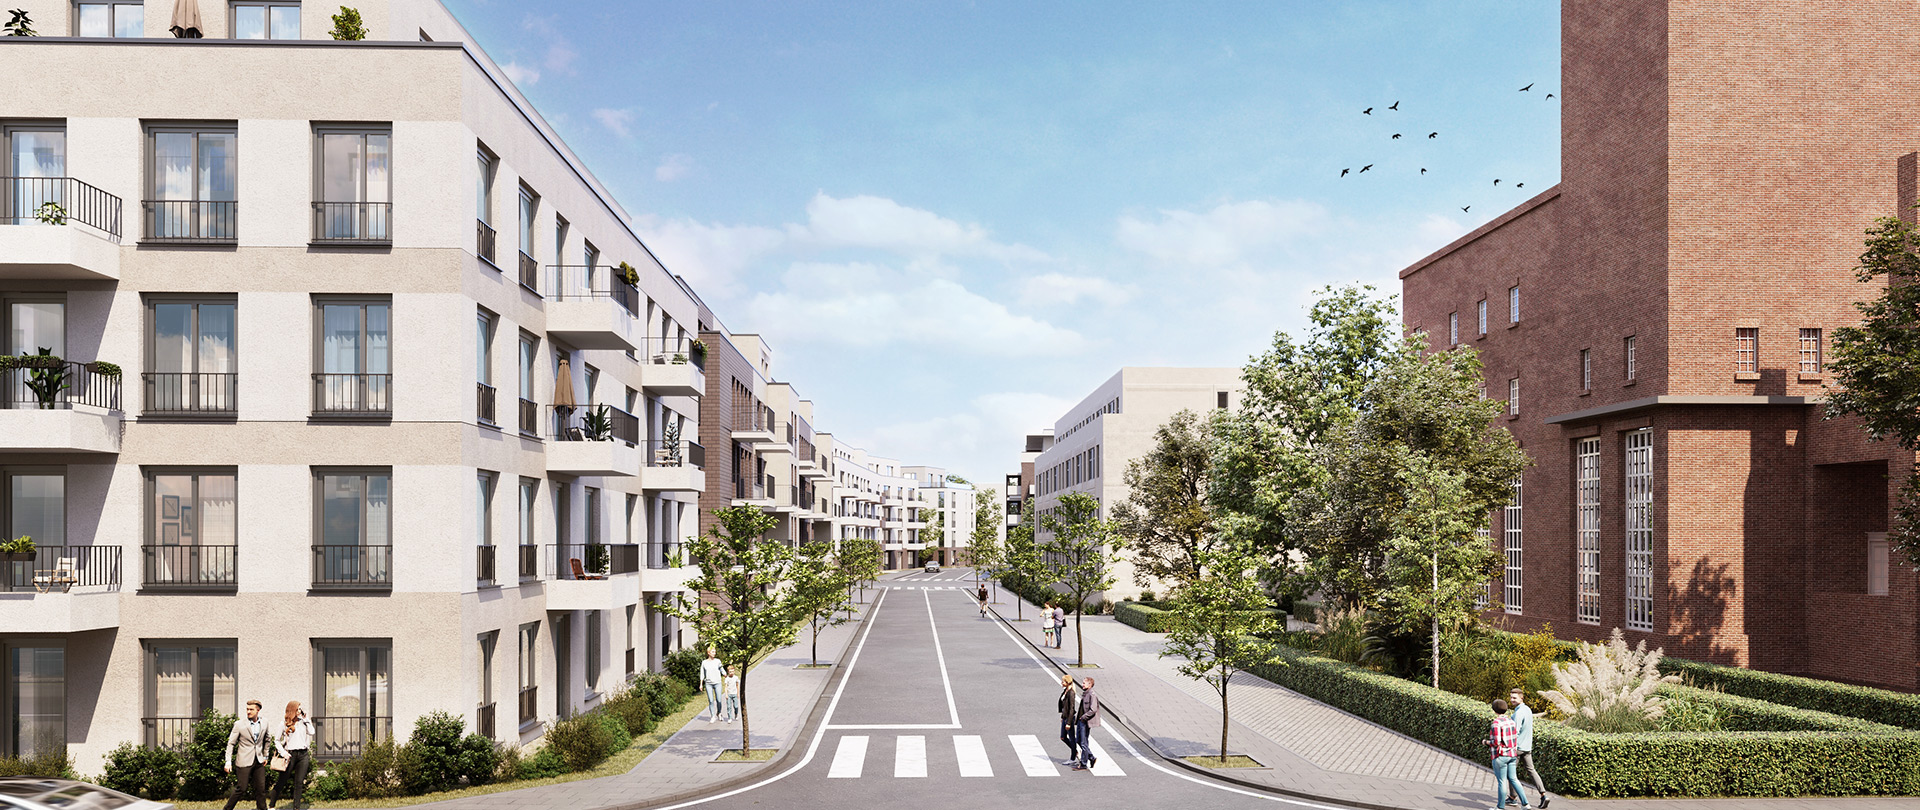 The Grounds continues expansion in Berlin’s outskirts with another purchase